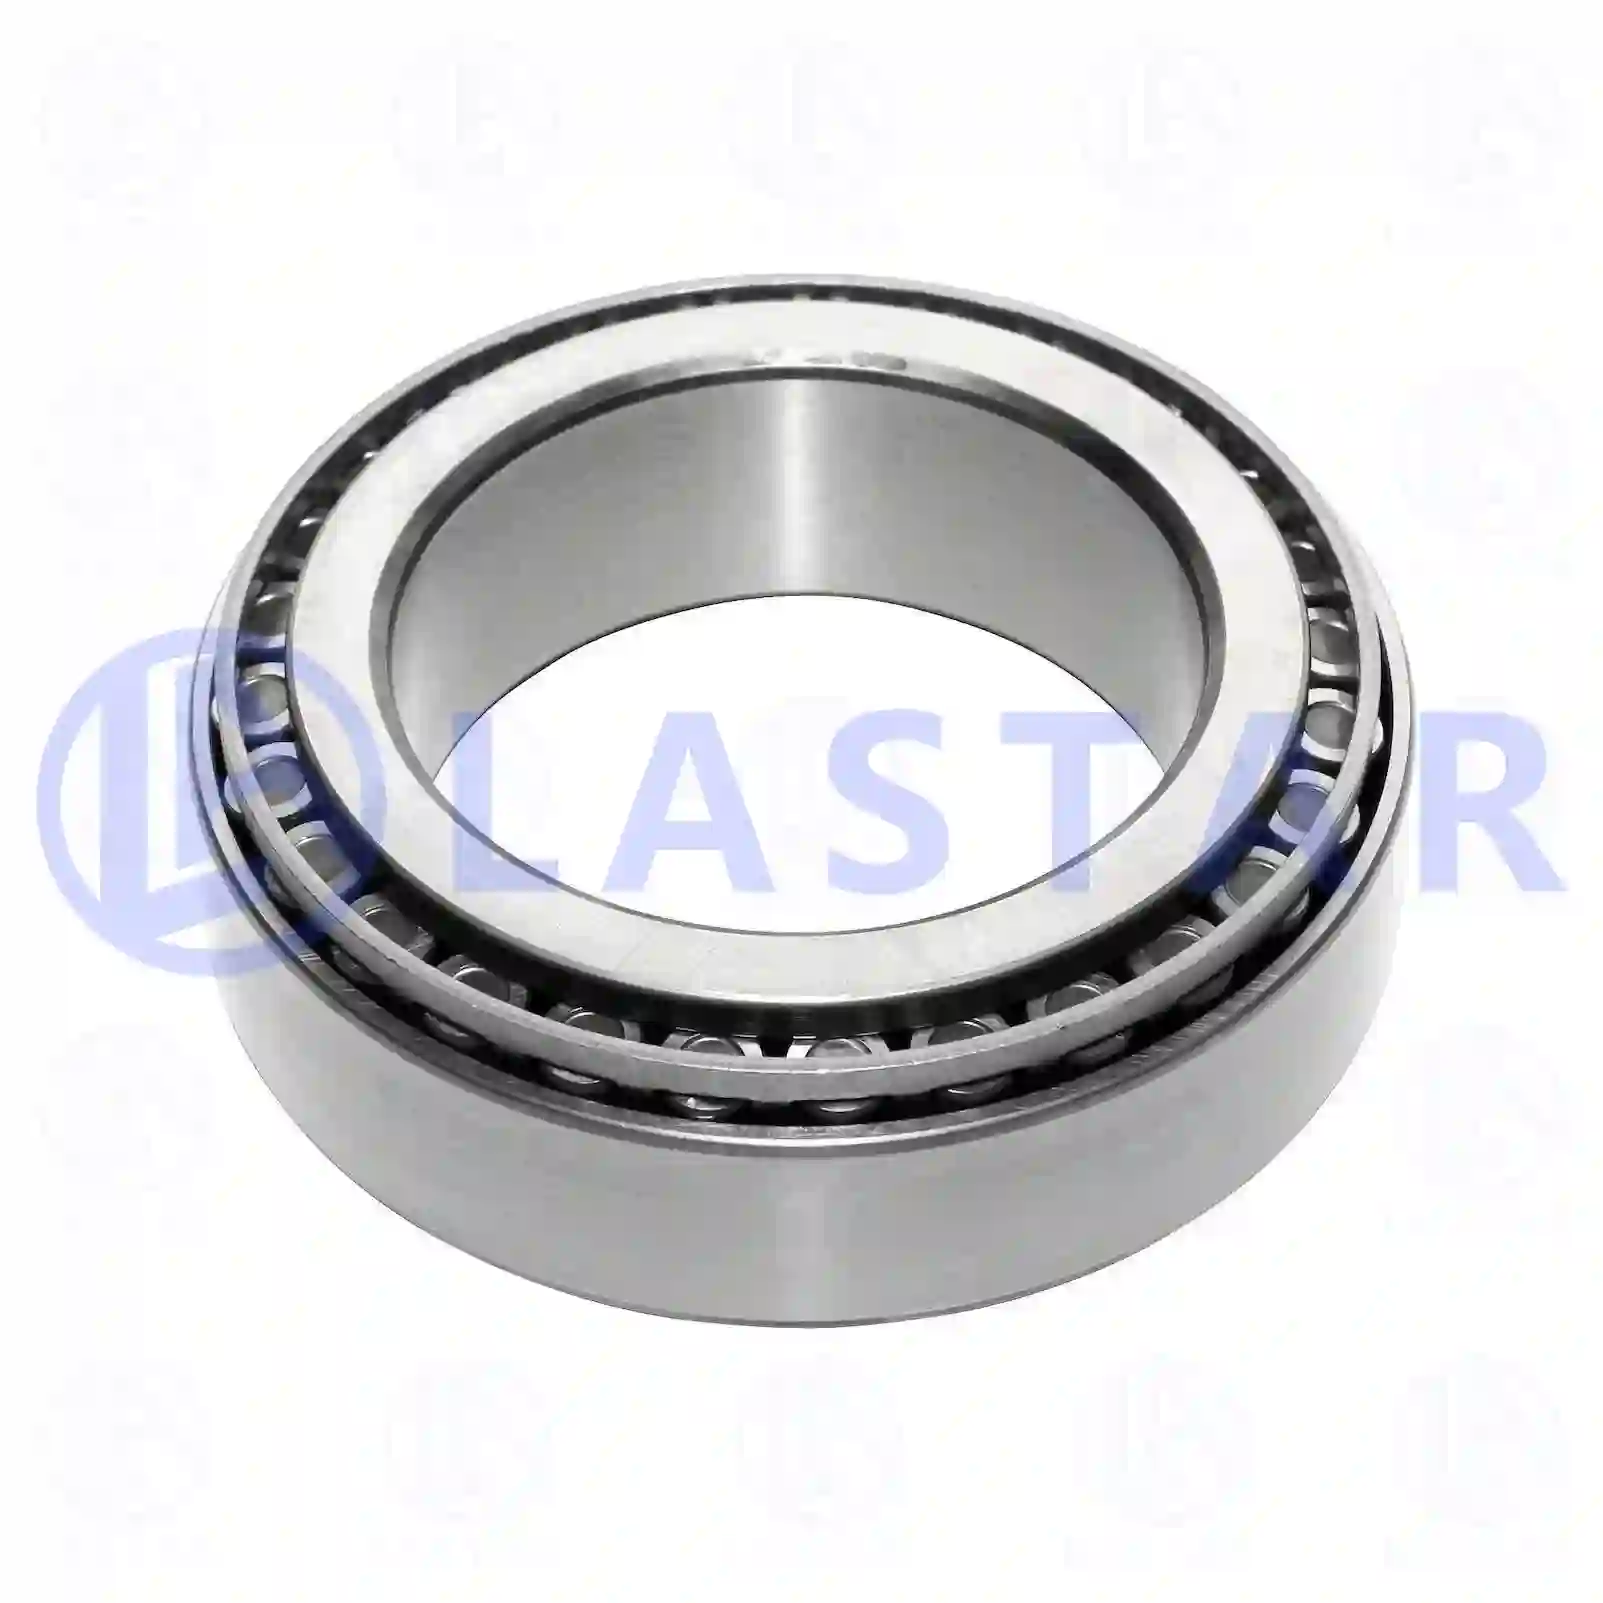 Bearings Tapered roller bearing, la no: 77725216 ,  oem no:0069818705, 0069819705, 0079814905, 1364631, 1911811, 264961 Lastar Spare Part | Truck Spare Parts, Auotomotive Spare Parts